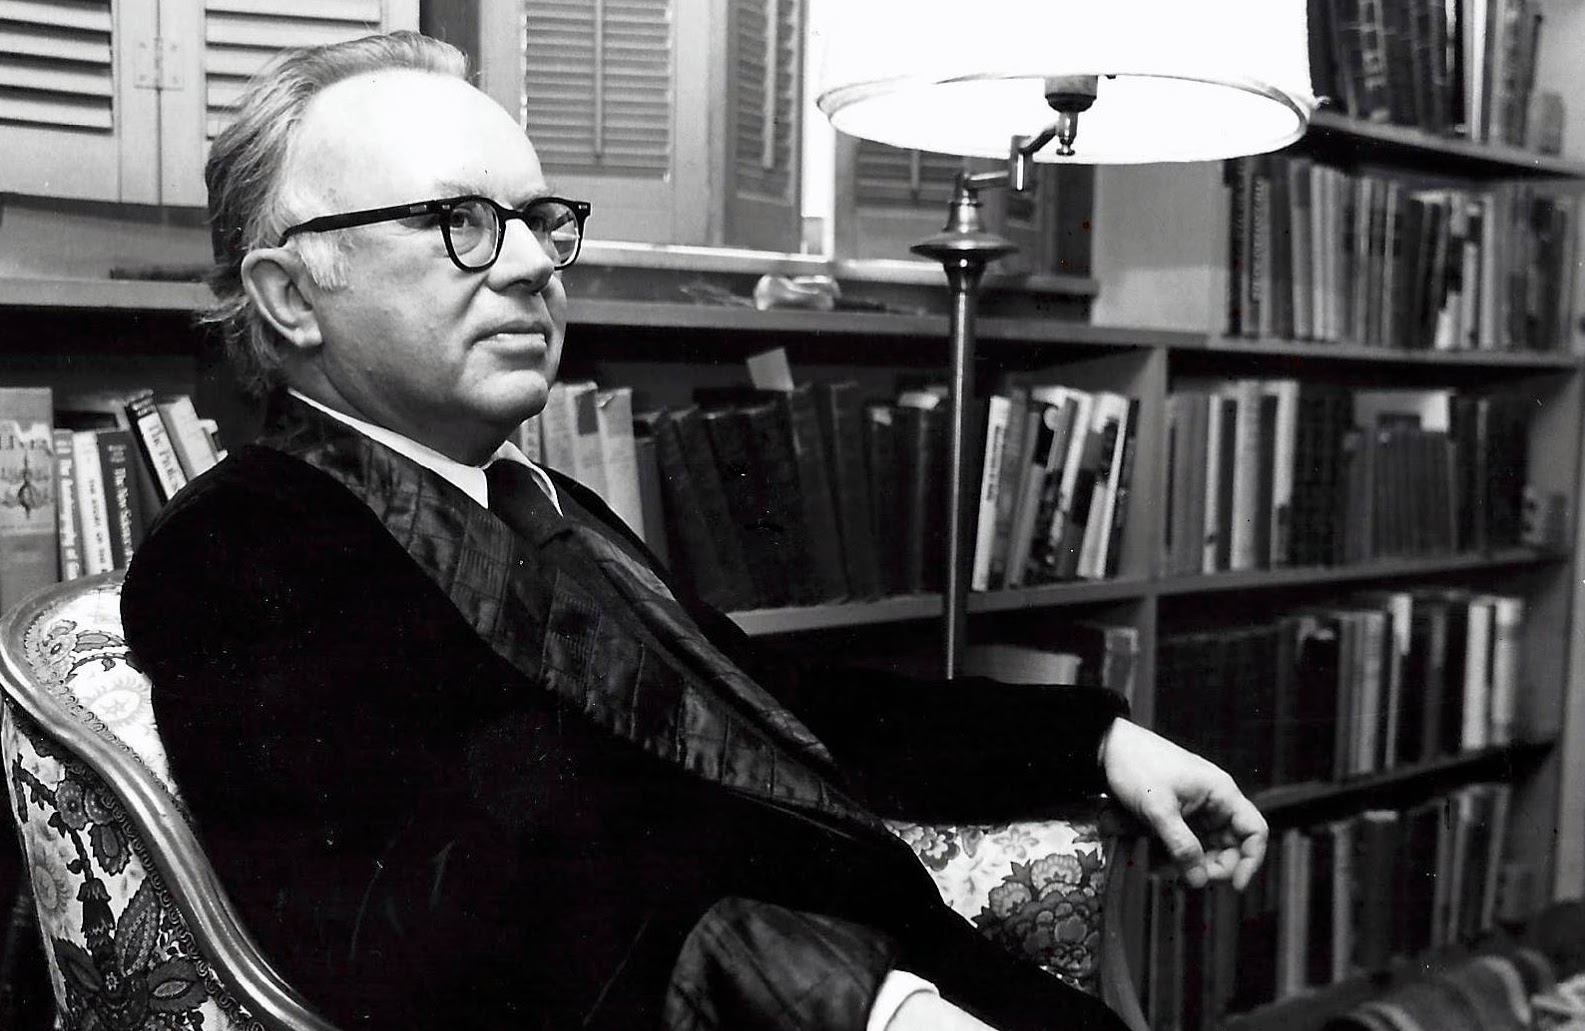 Russell Kirk in black and white (The Russell Kirk Center)